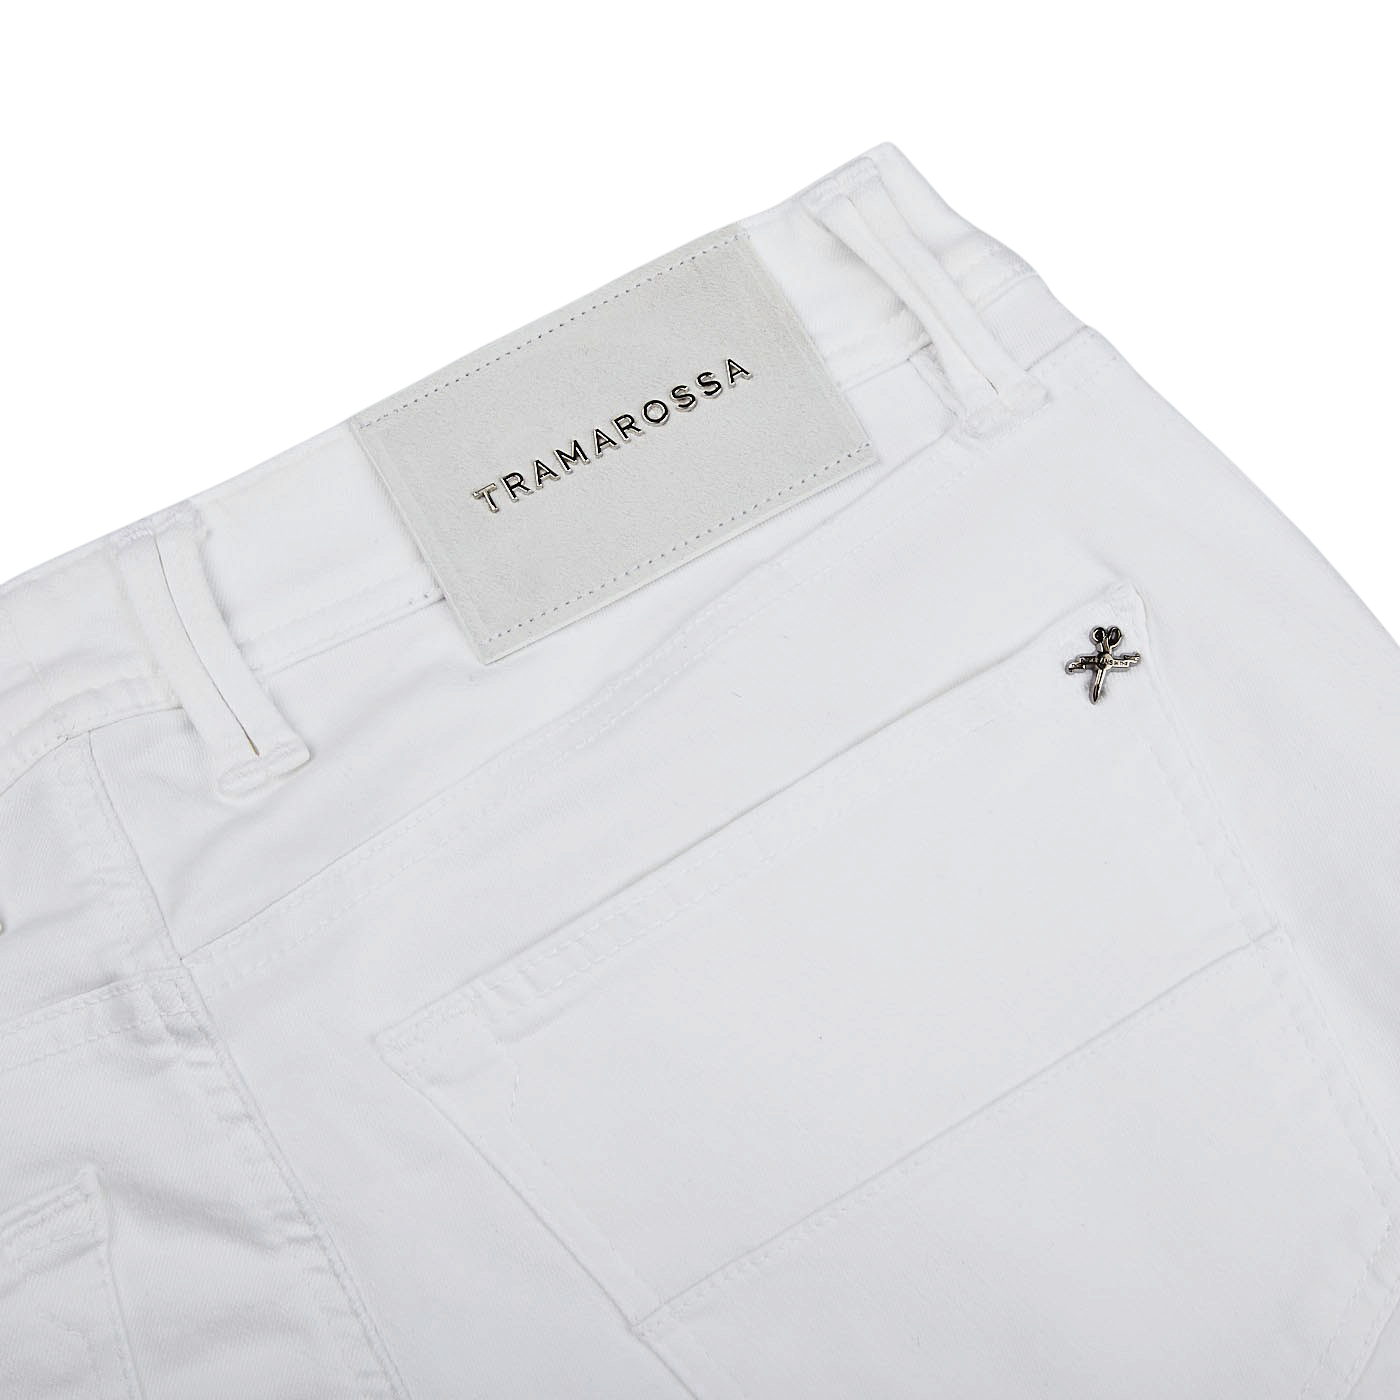 Tramarossa's White Super Stretch Michelangelo Jeans with a logo on them.